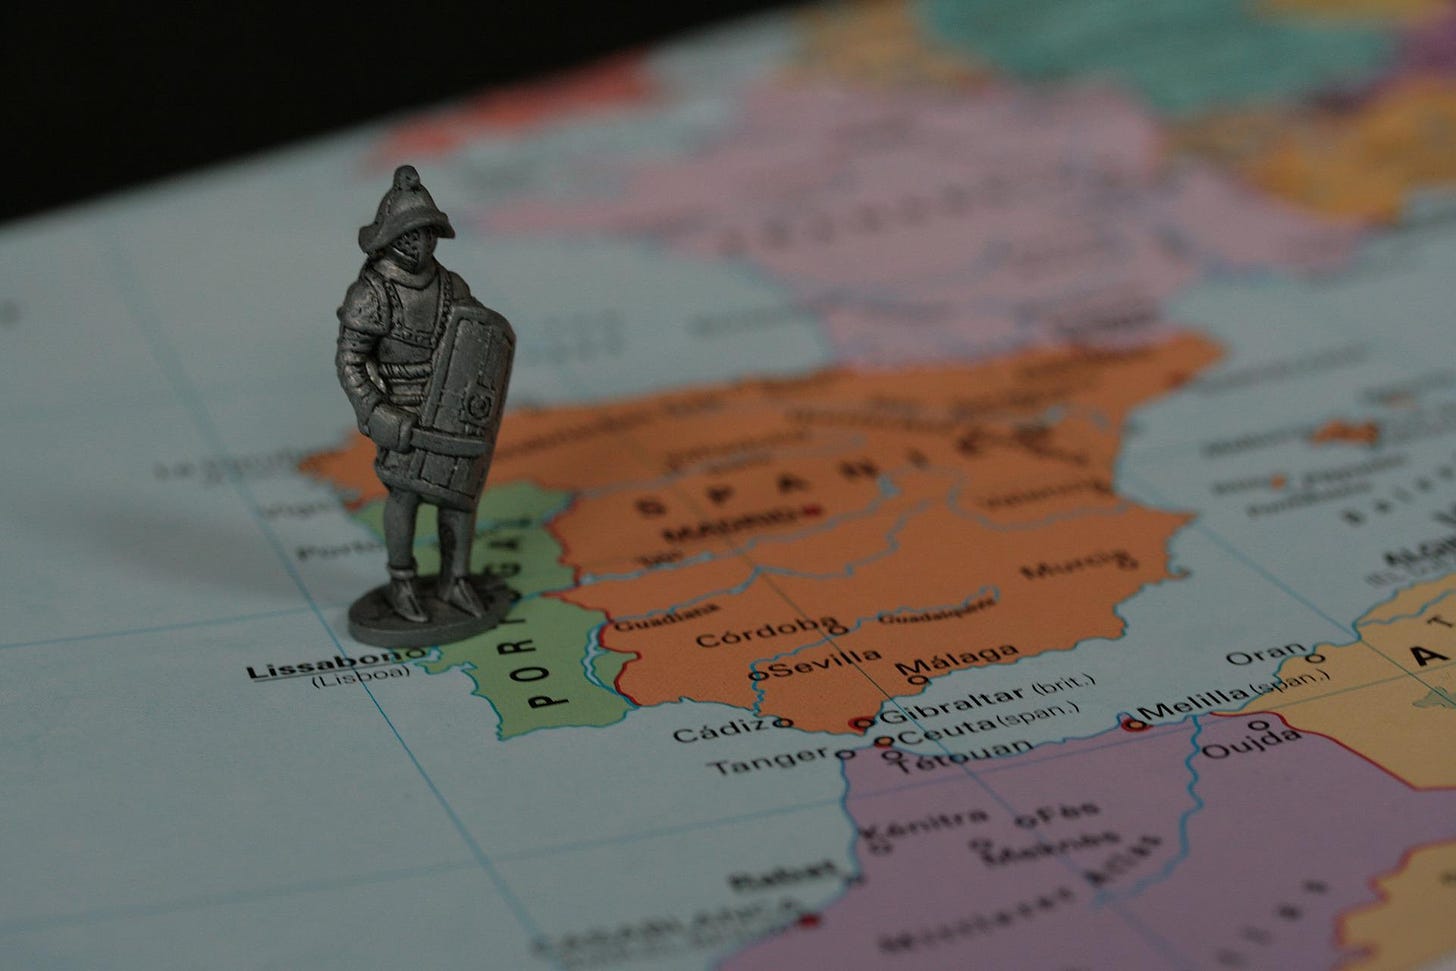 Explorer figure on top of the map of Portugal